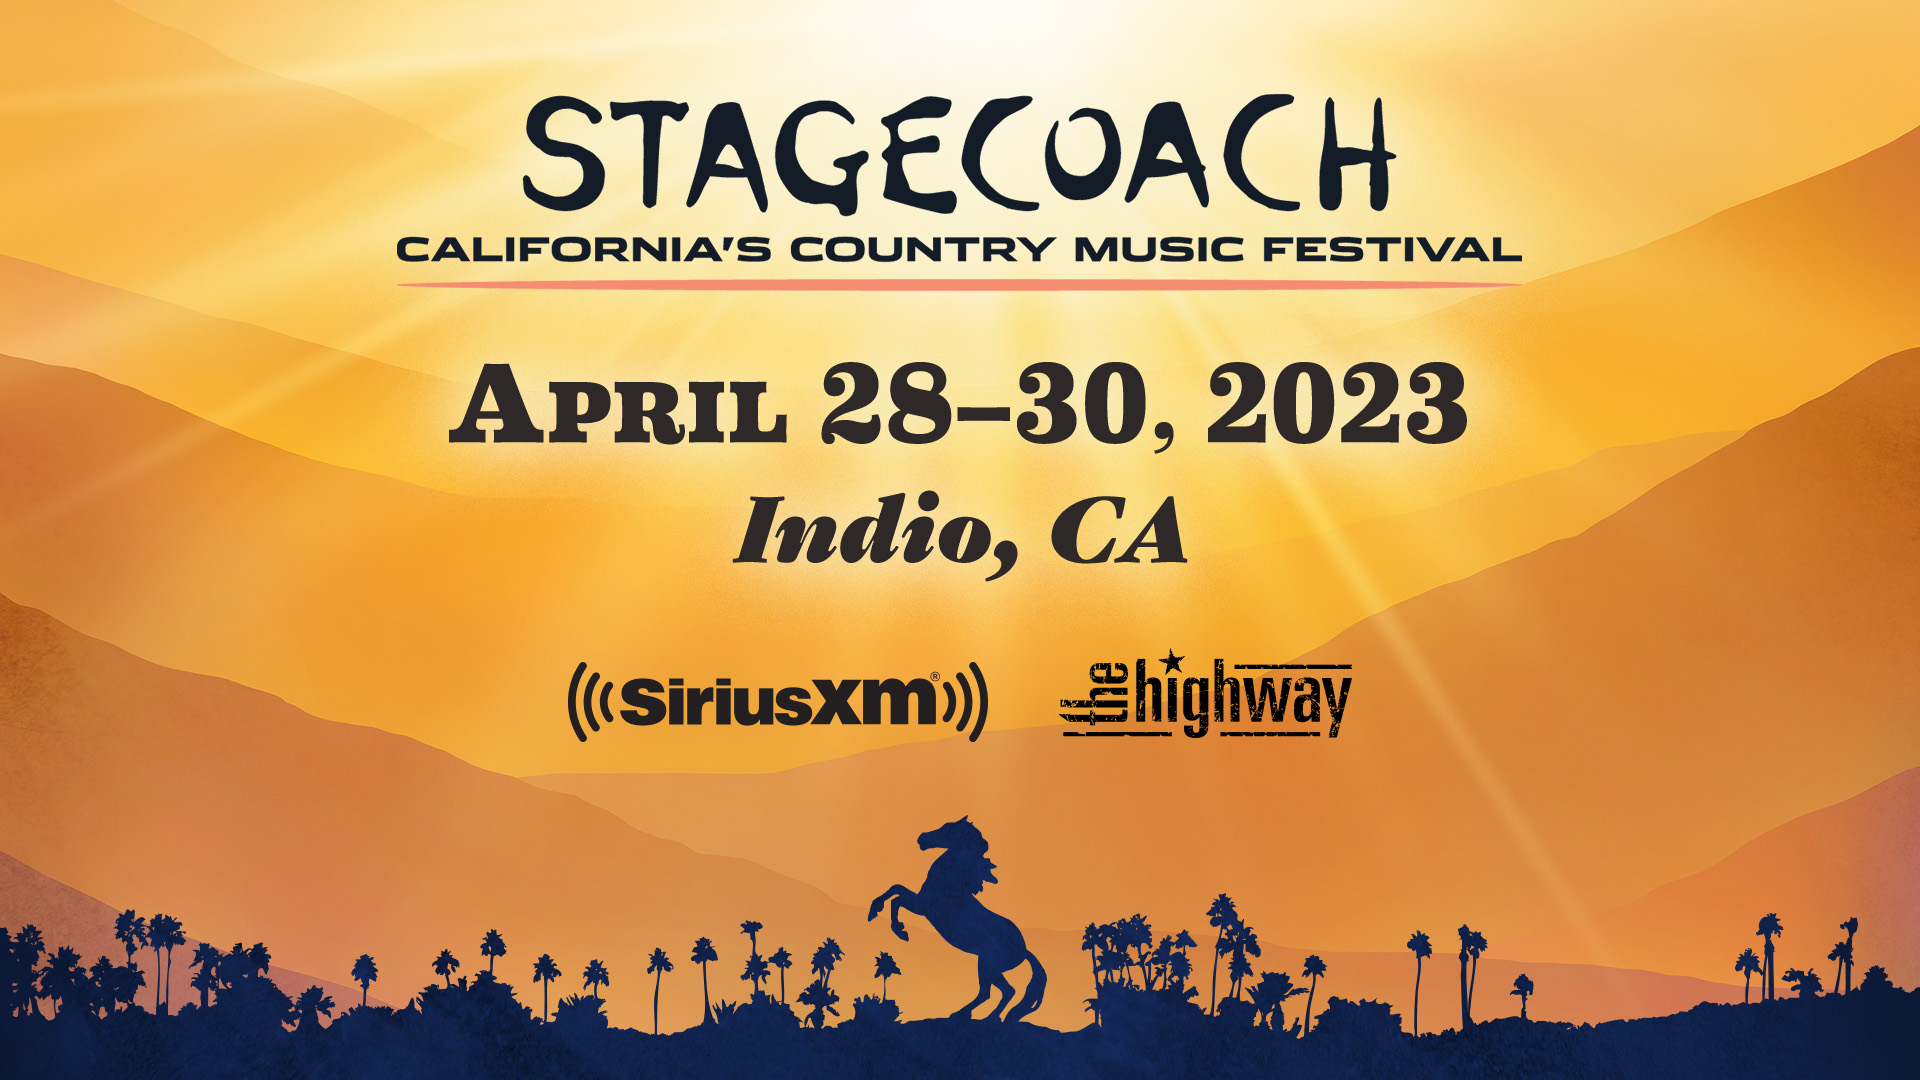 Stagecoach 2023 on SiriusXM The Highway